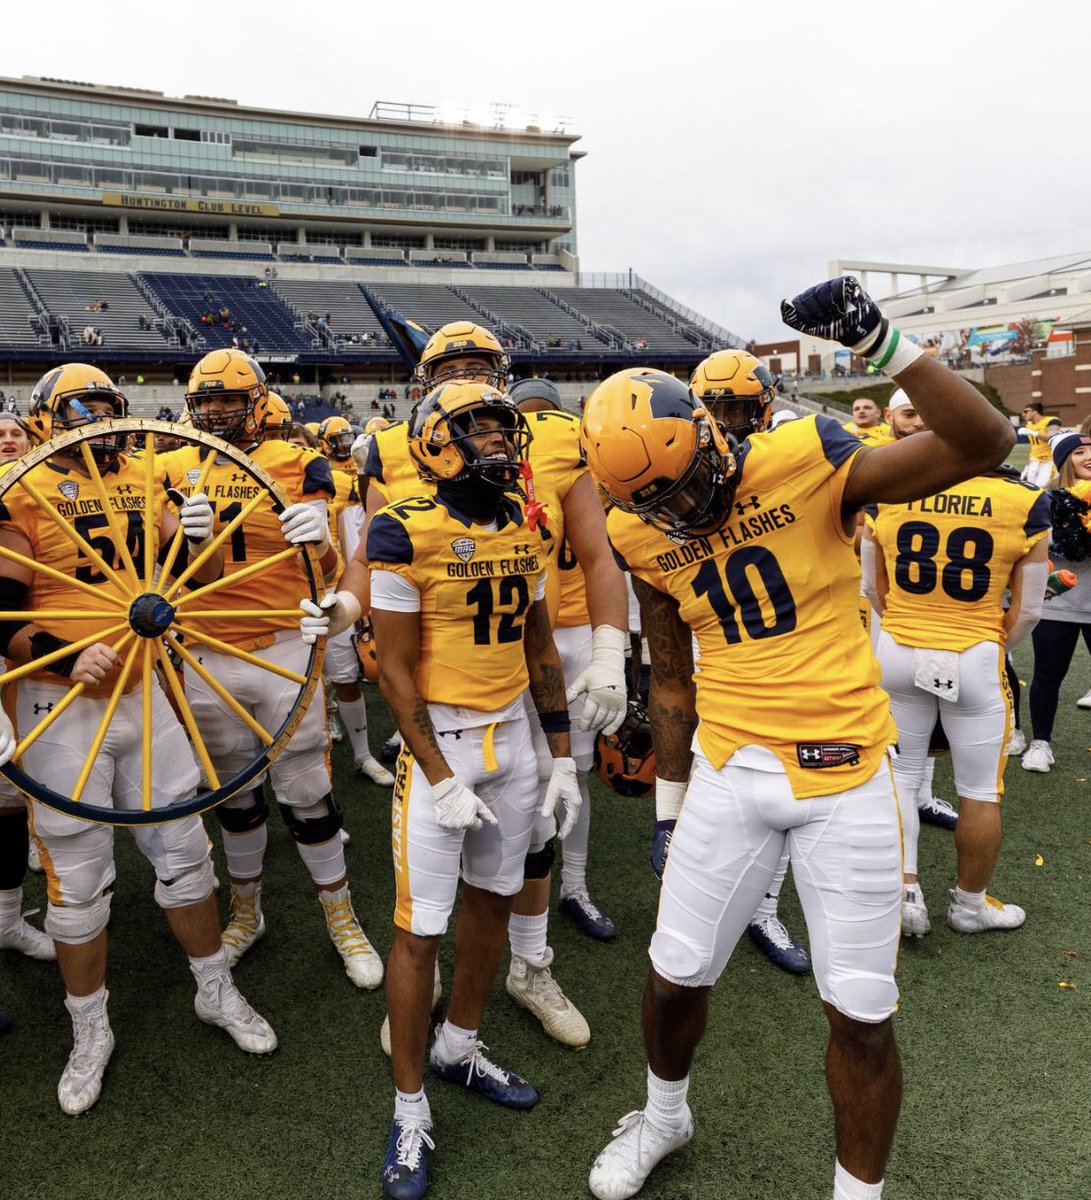 Blessed to receive an offer from Kent state🤙@Coach_Ferrell55 #kentGRIT